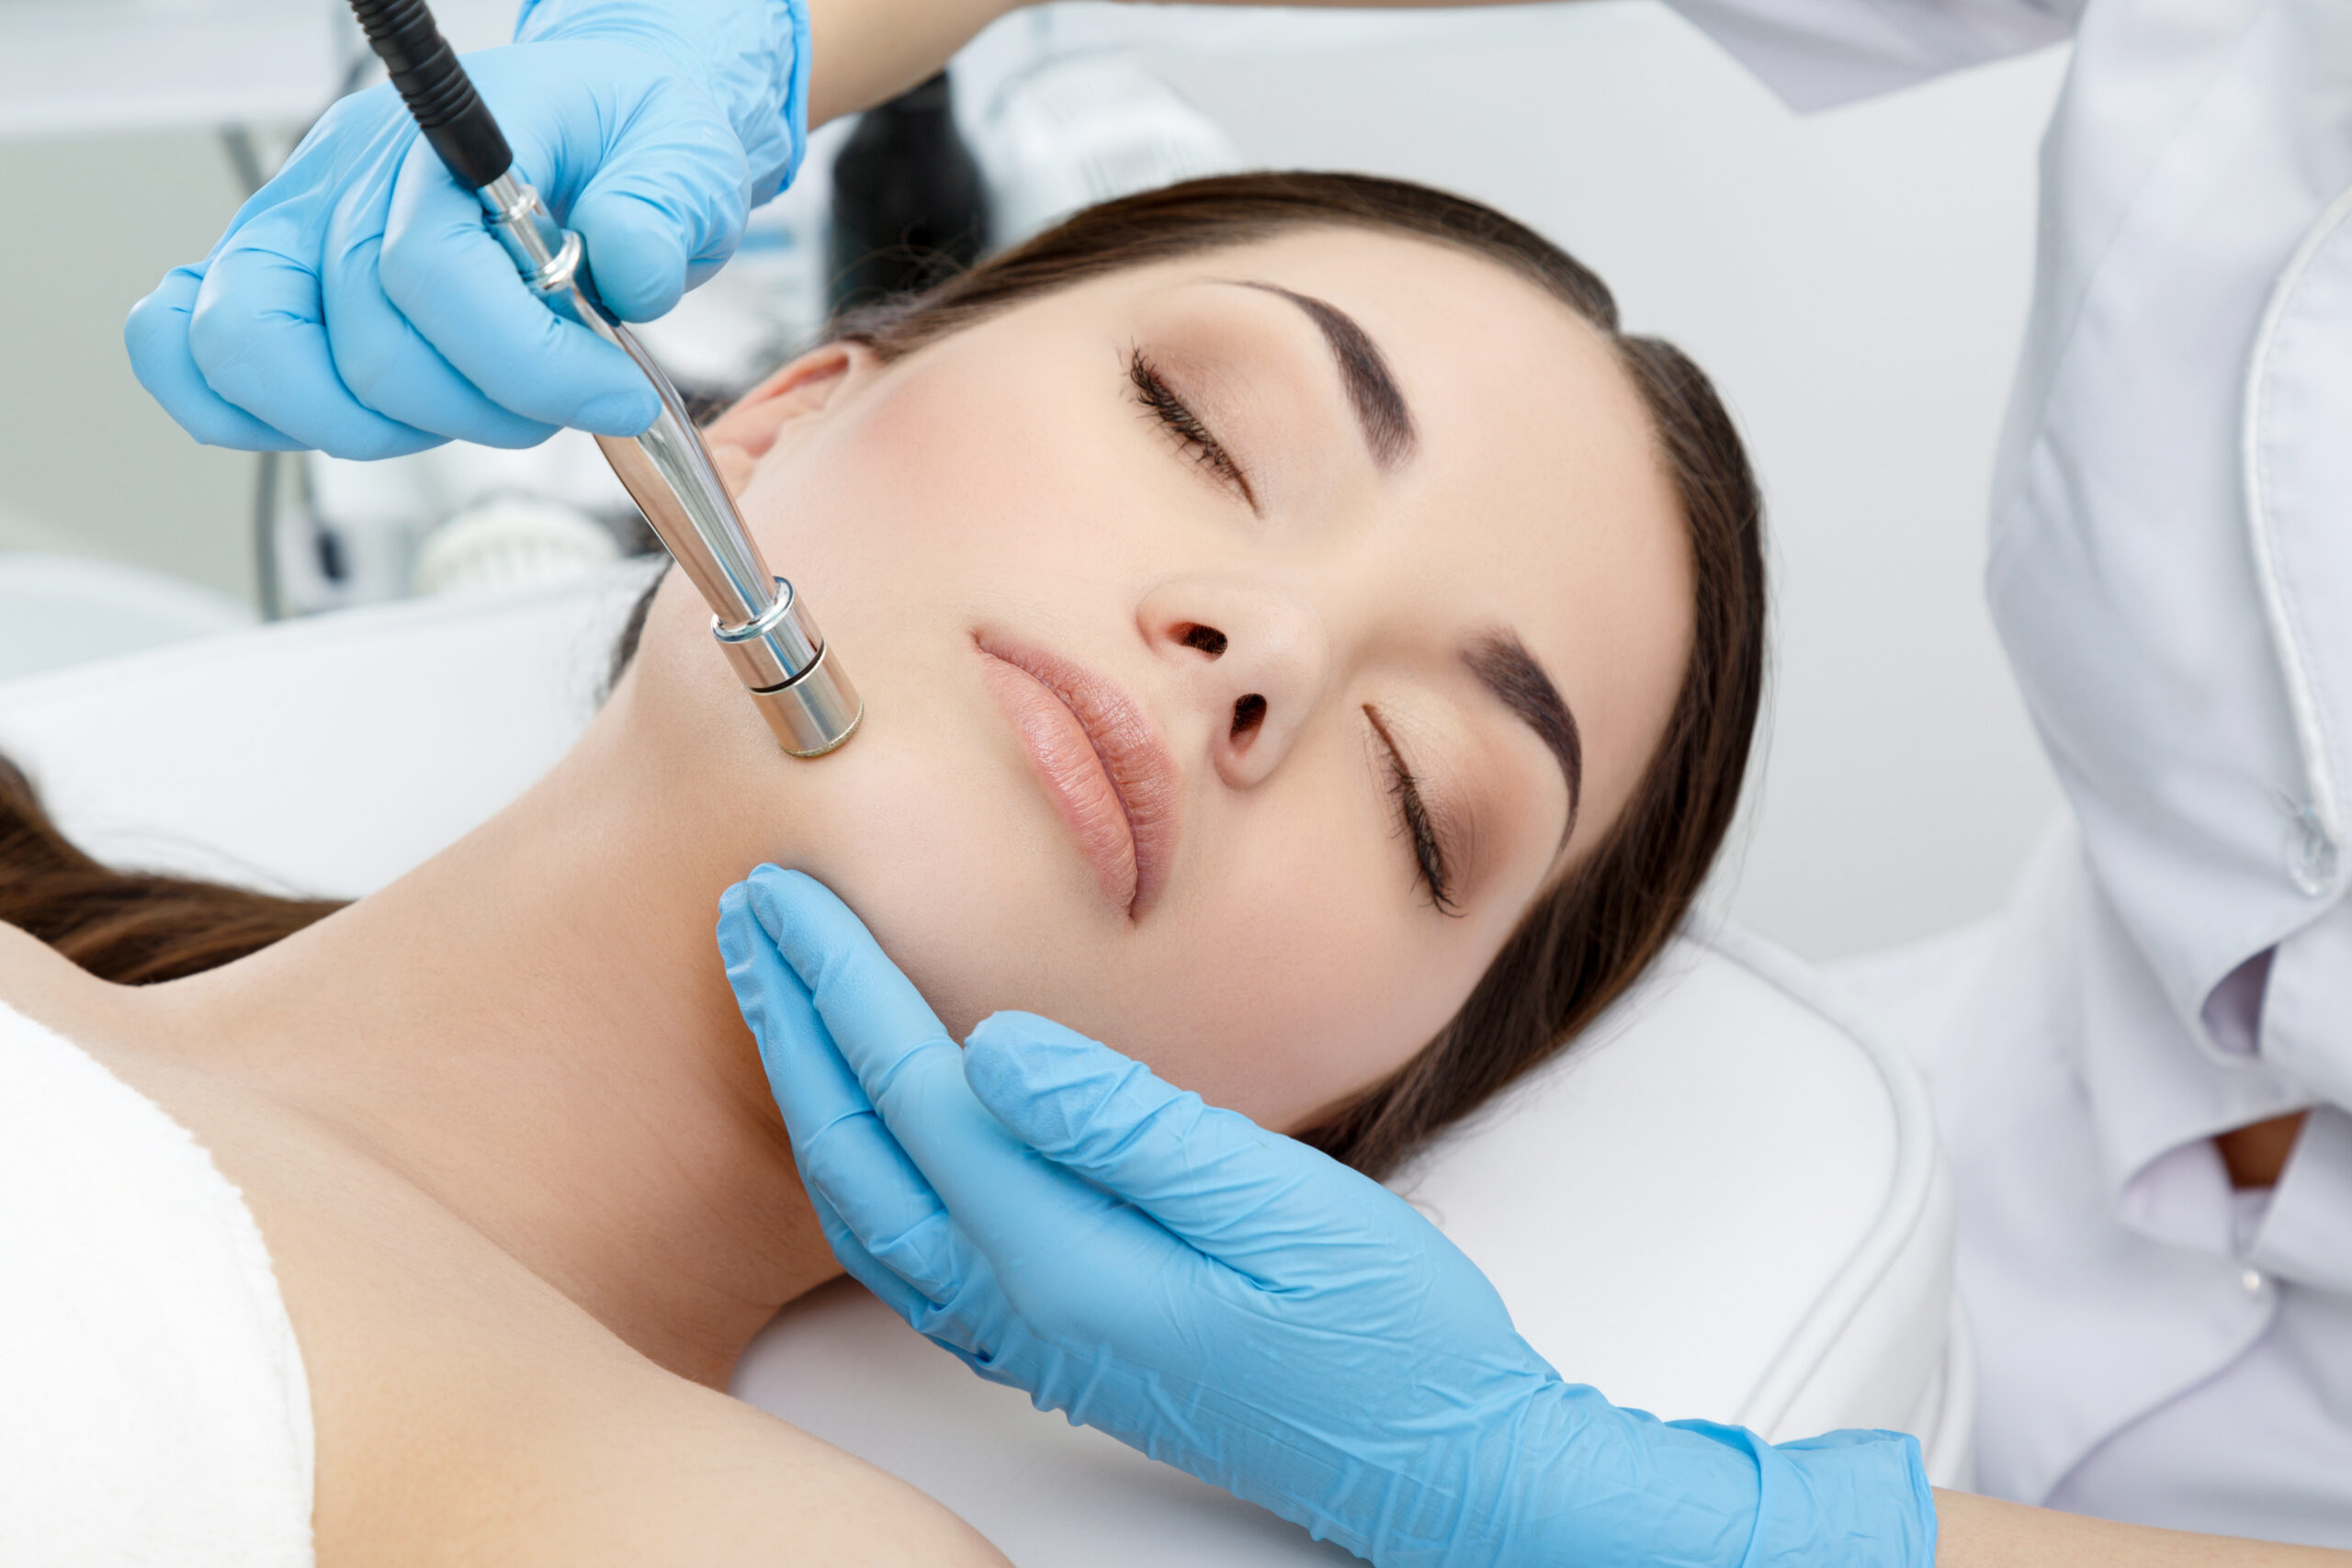 A Beautiful female getting microneedling | Simply Serene Wellness and Aesthetics in St. Cloud, MN